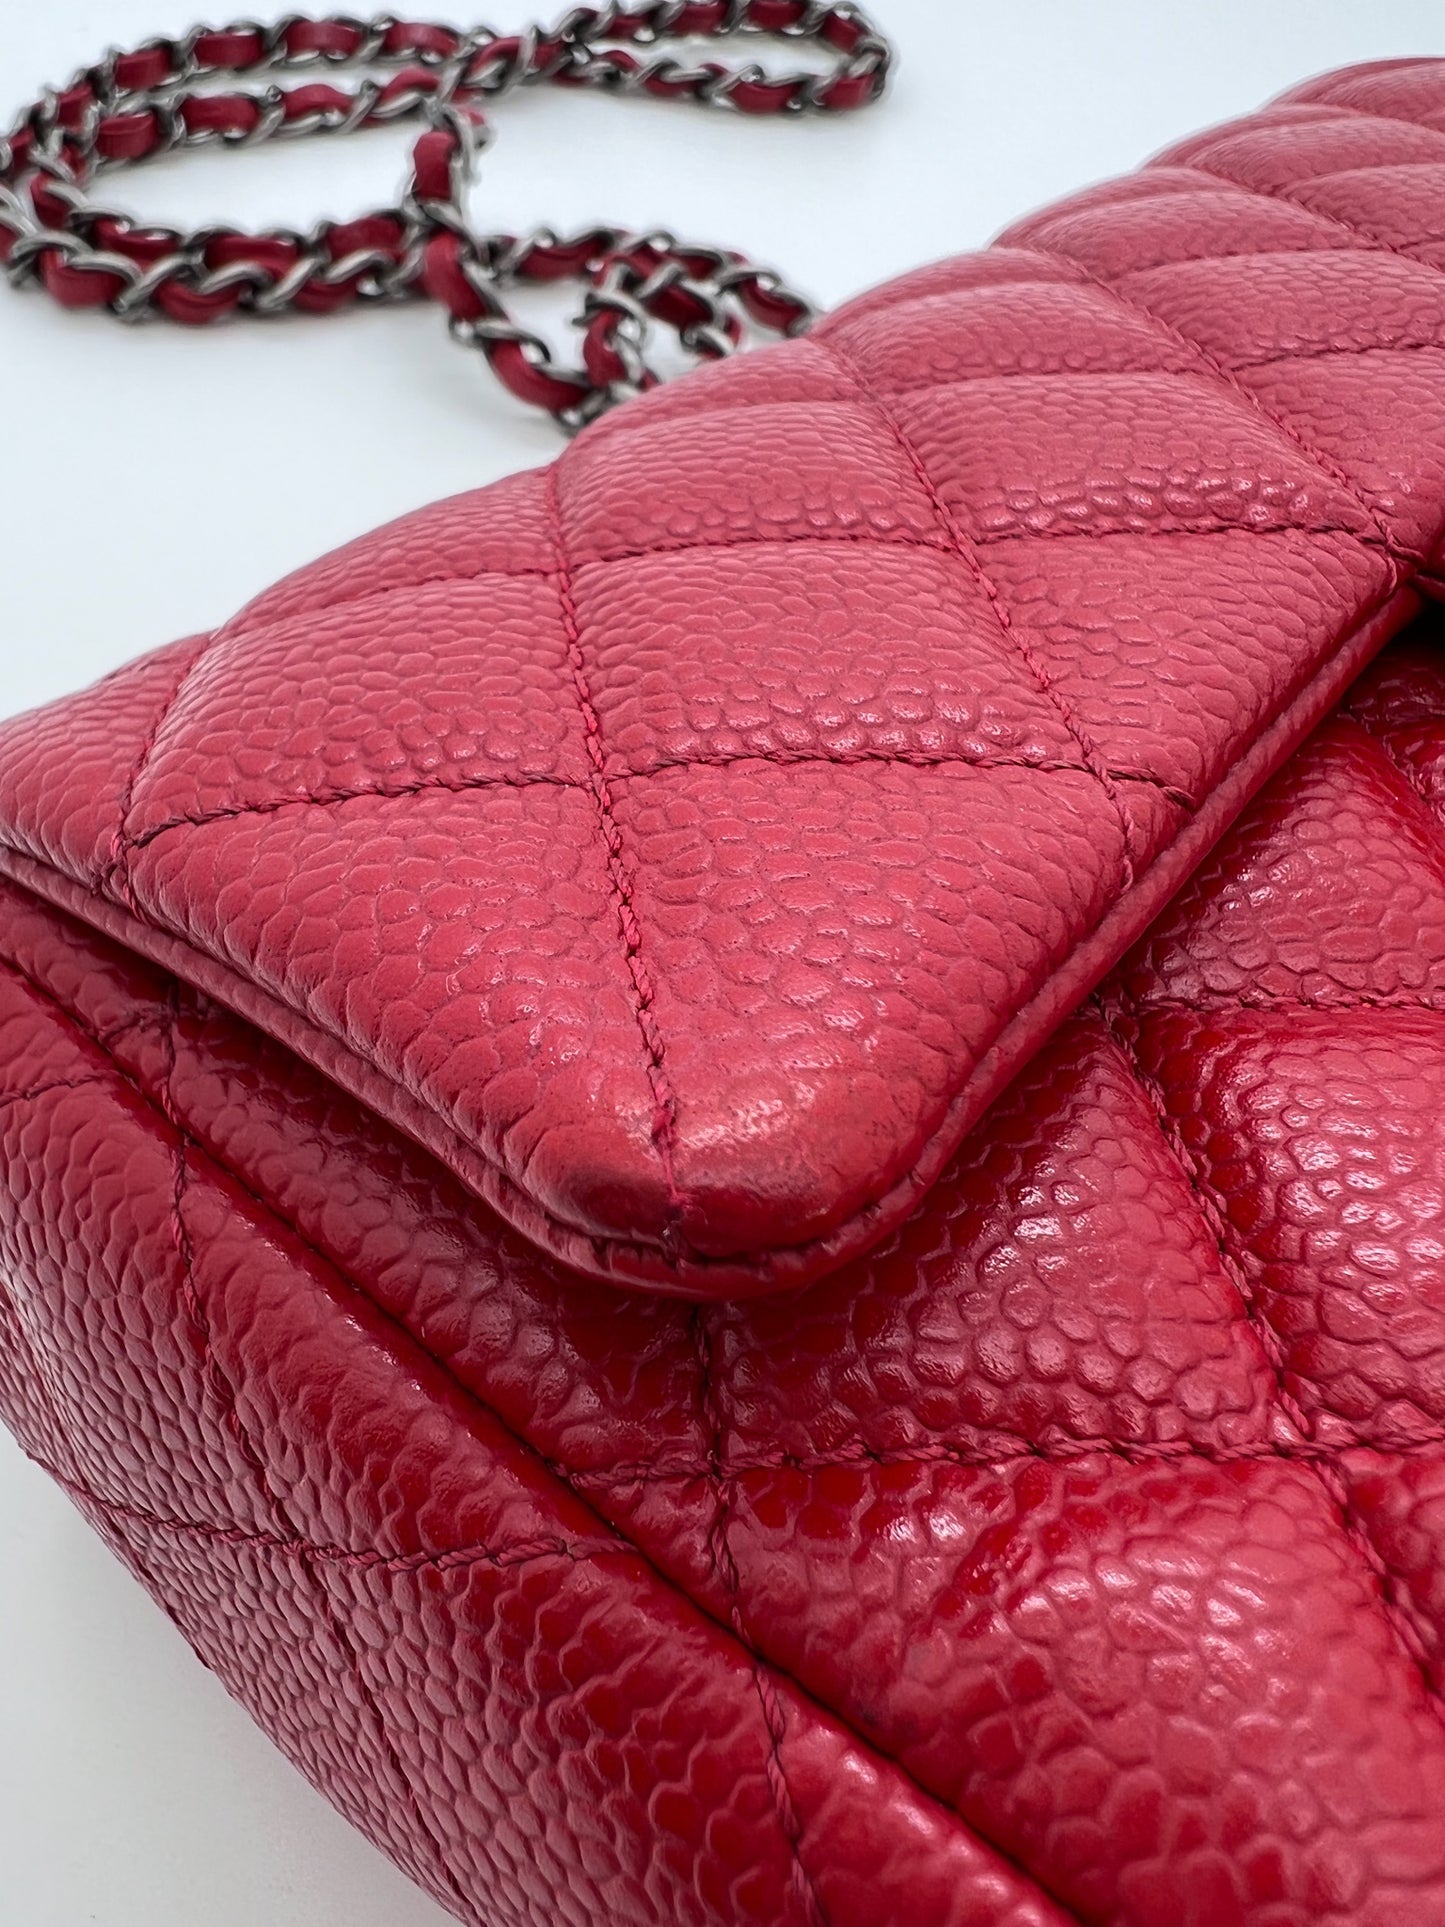 CHANEL MINI CLASSIC FLAP IN RED CAVIAR LEATHER